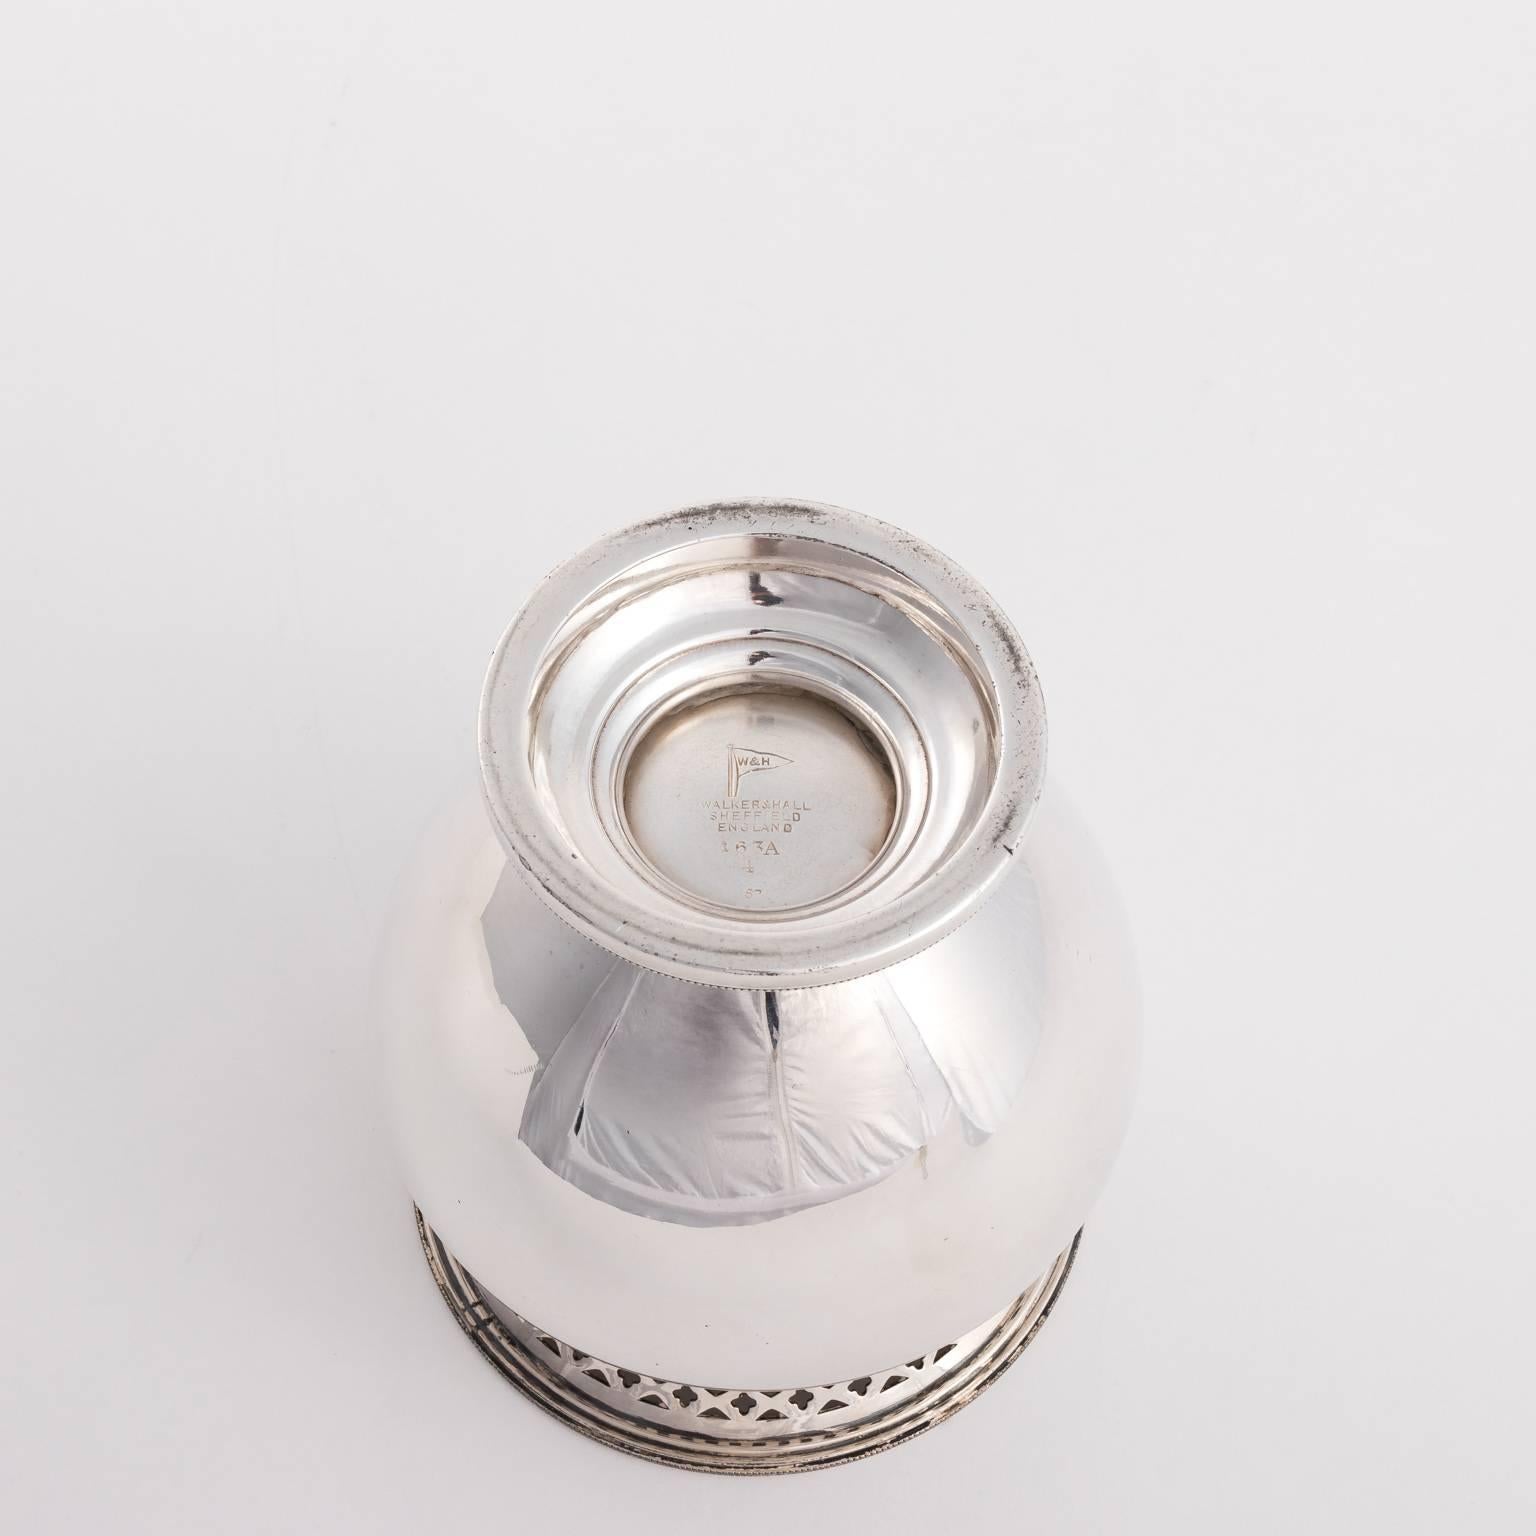 Silver plated cachepot with a pierced rim by Walker and Hall in a polished finish, circa 1930.
 